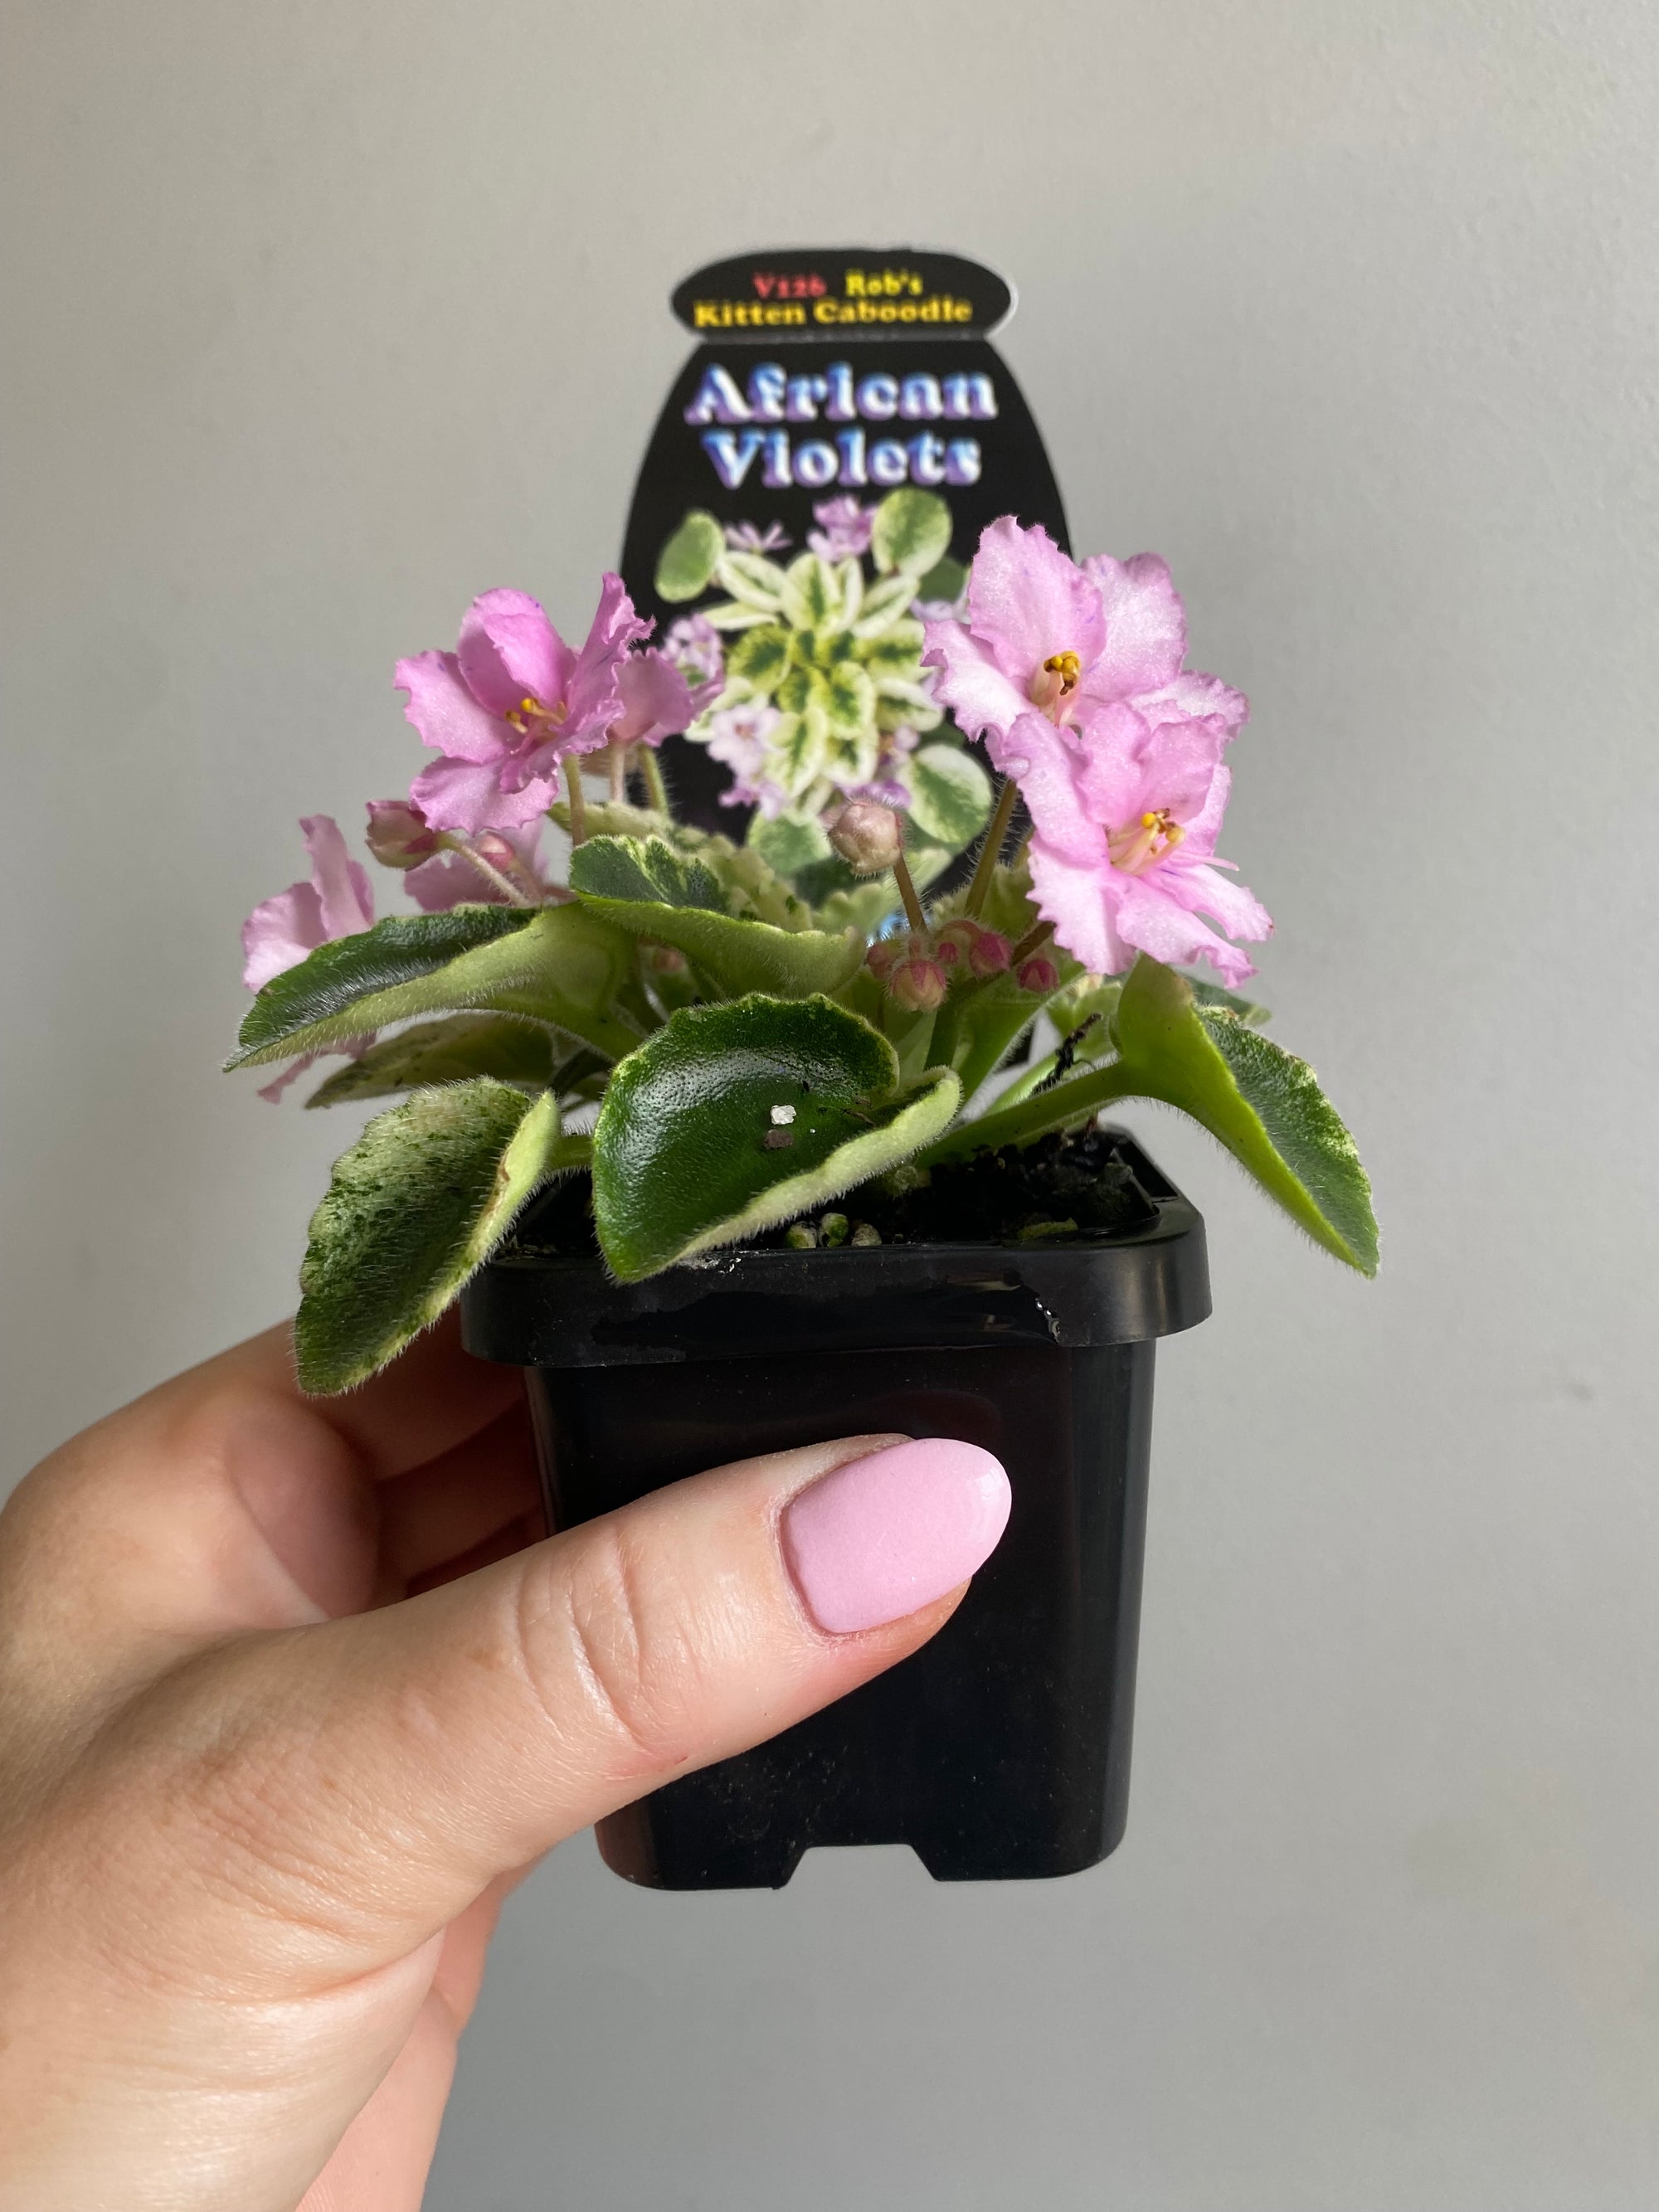 African Violet - Rob’s Kitten Caboodle (pink flower)